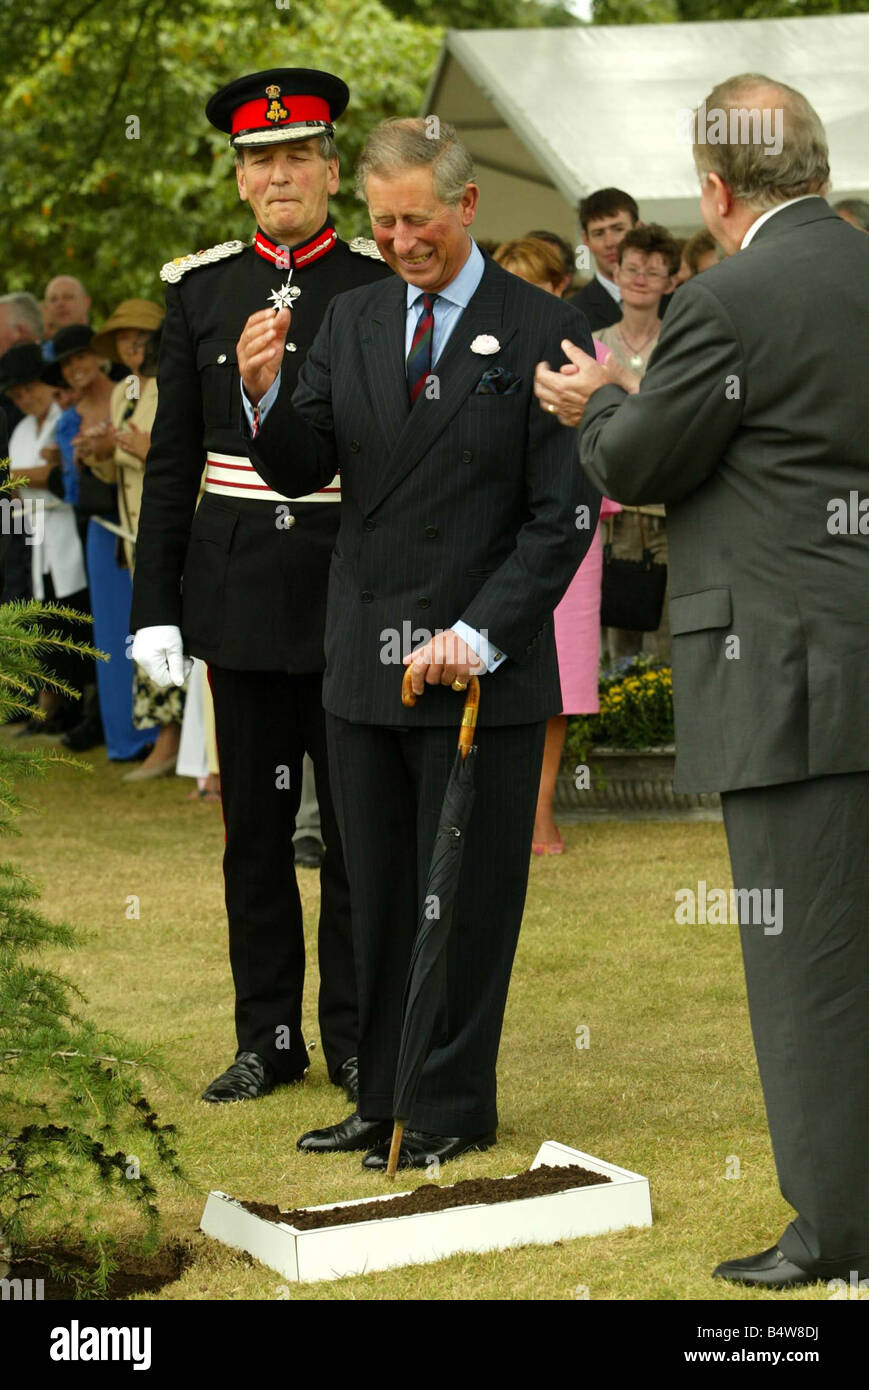 Prince Charles At Hillsborough Castle Garden Party Sept 2003 Secretary of State Paul Murphy applauds the tree planting by Prince Charles at Hillsborough Castle Stock Photo